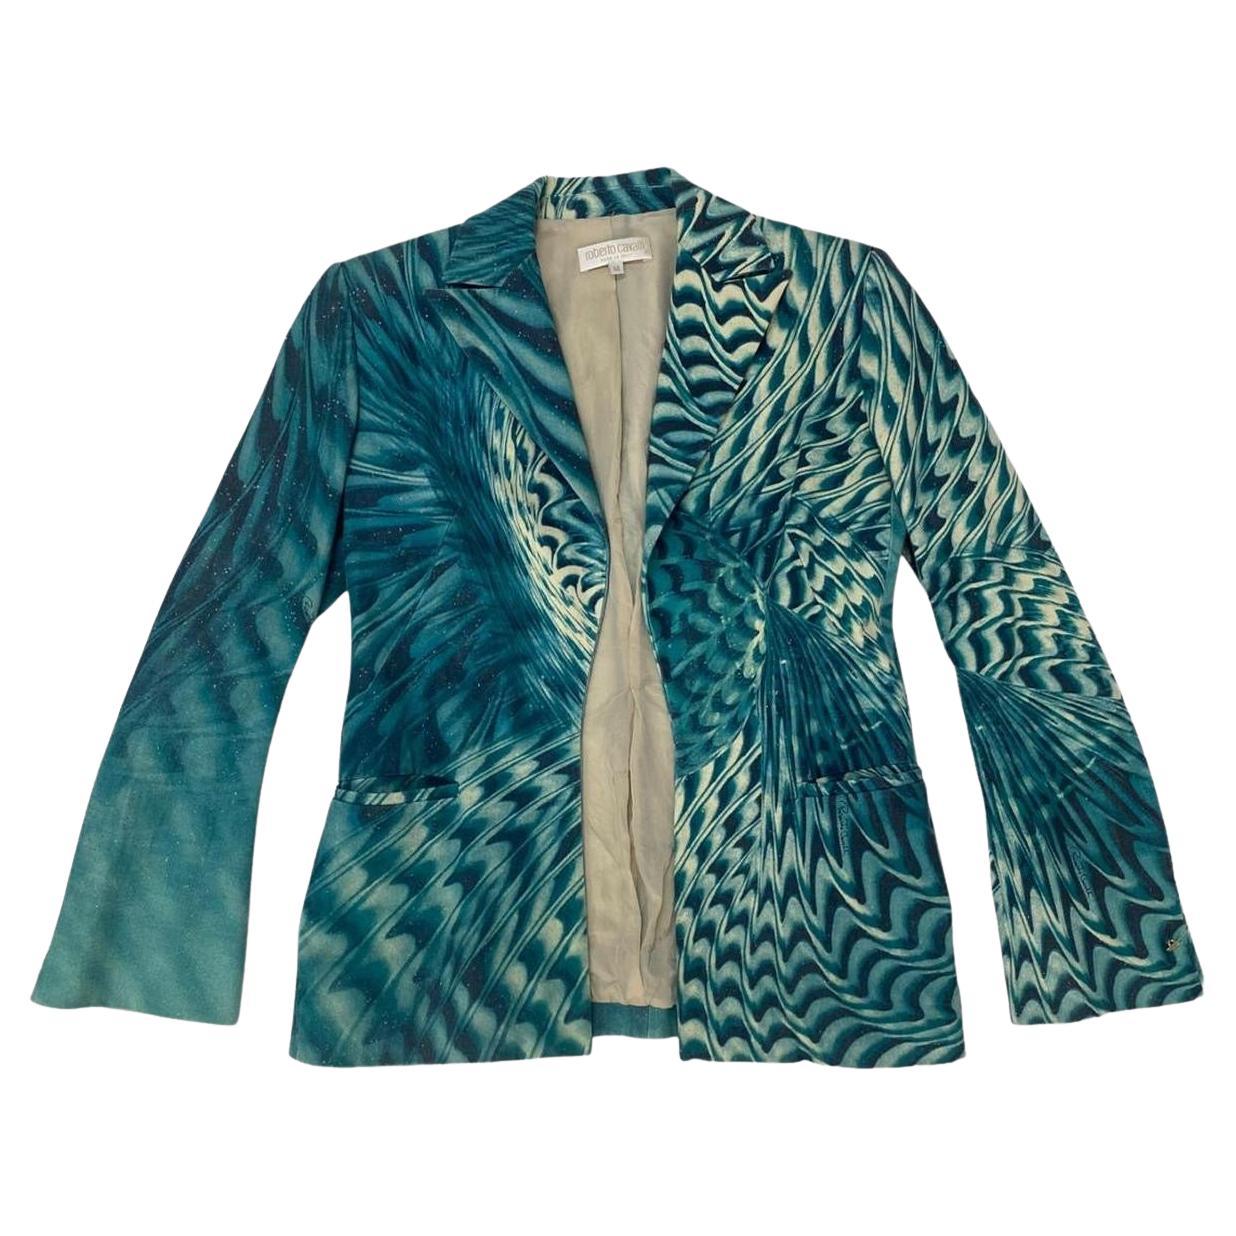 2001 Roberto Cavalli Teal Blue Psychedelic Print Cotton Twill Blazer For Sale